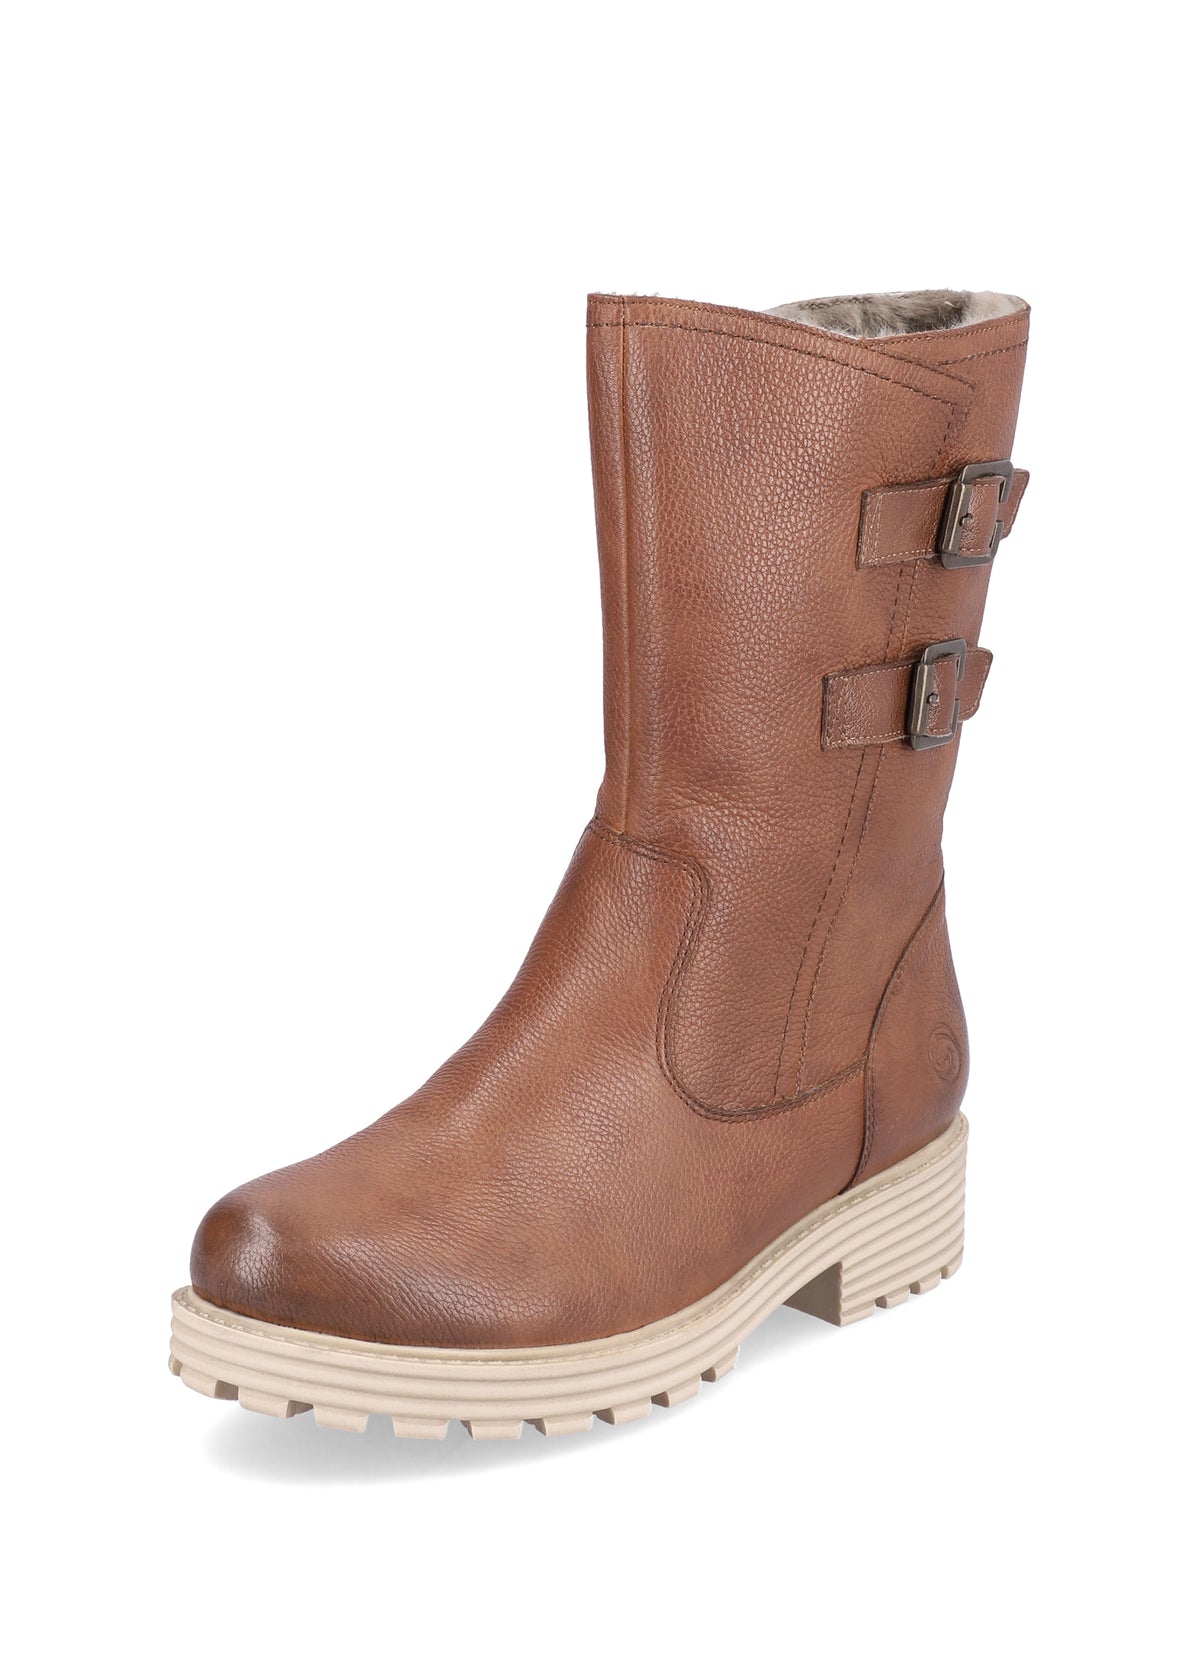 Winter boots - brown